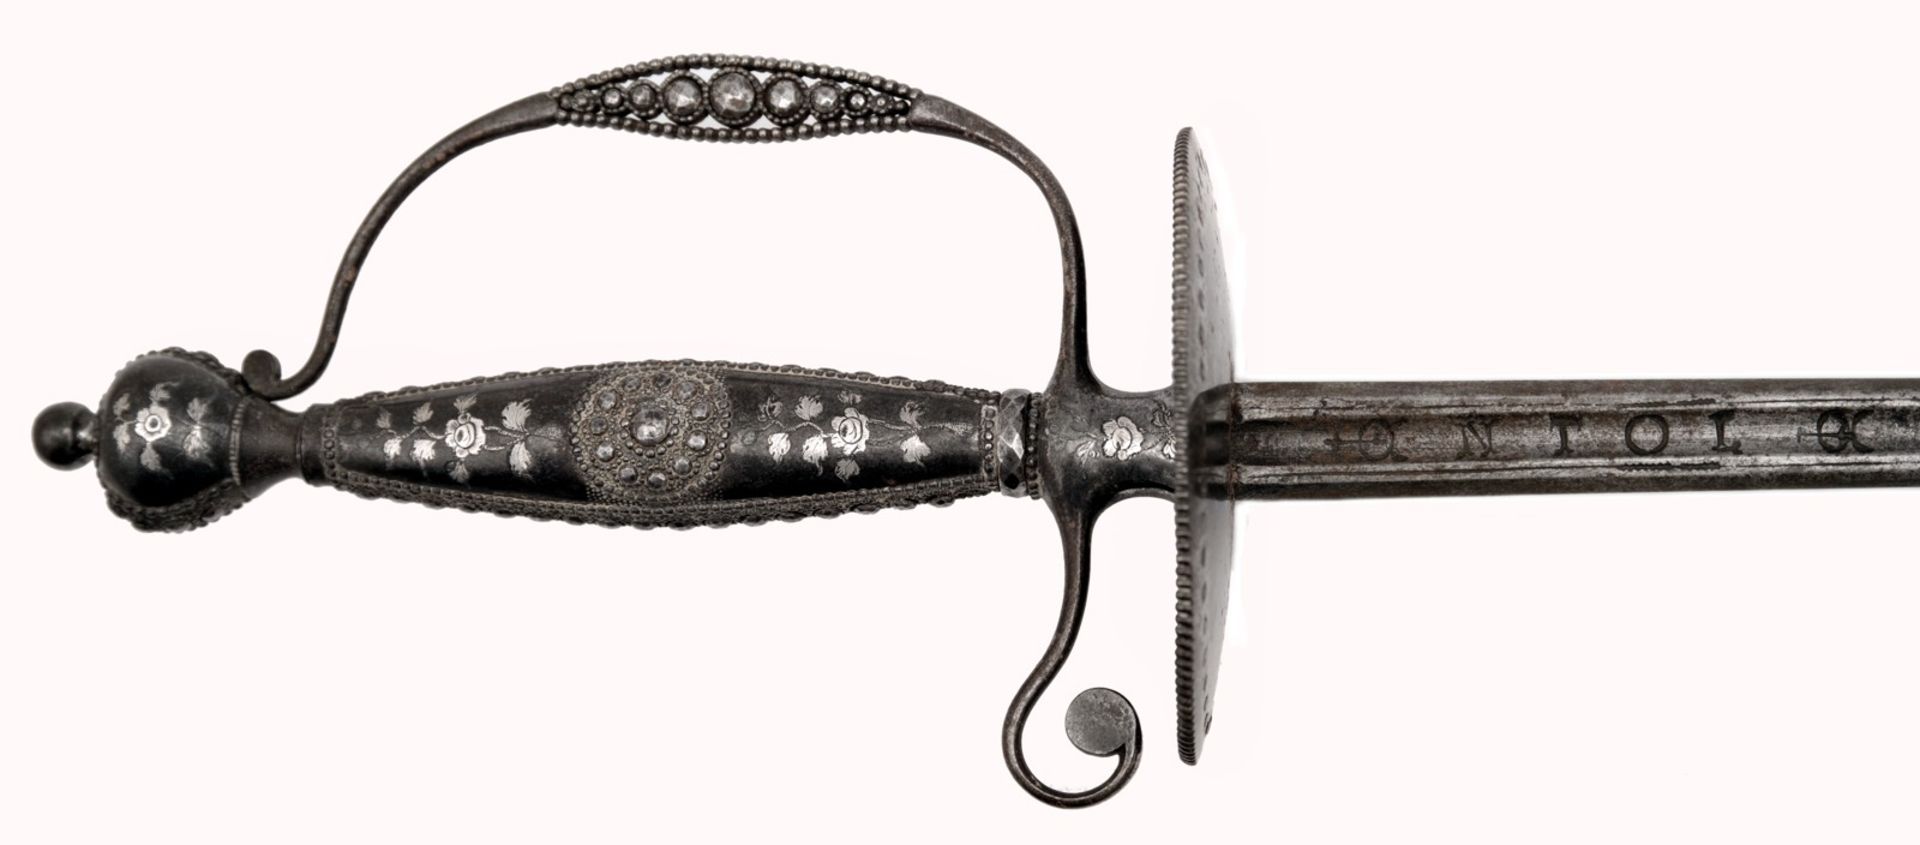 A French Iron Small-Sword - Image 3 of 7